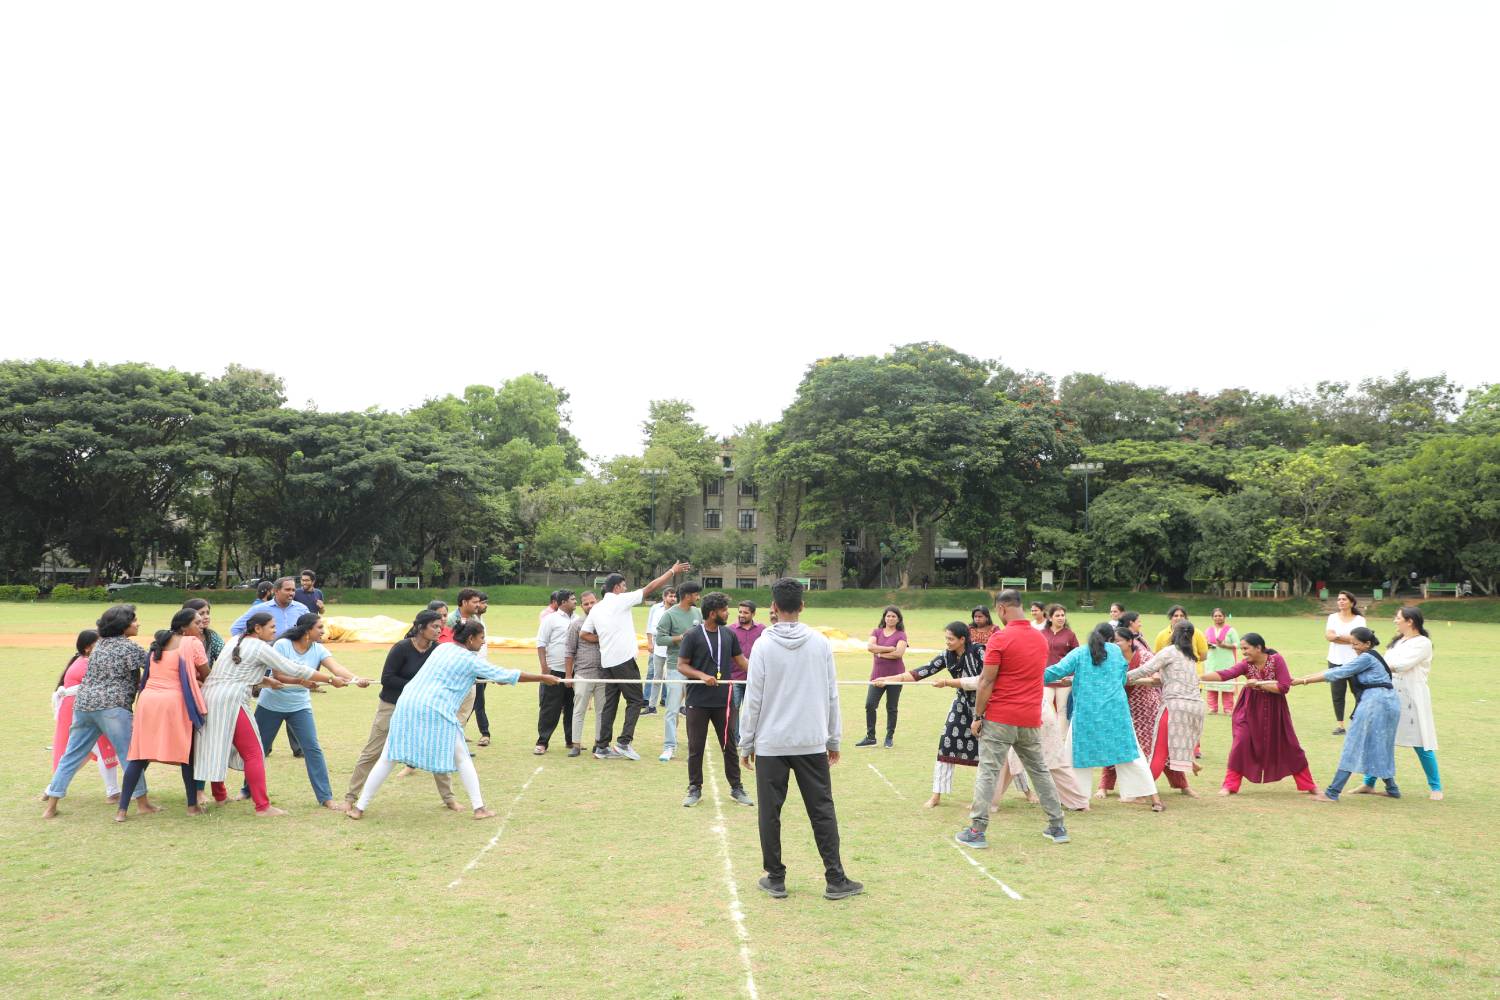 The Staff Recreation Club of IIMB organized a plethora of sports events to mark the 50th Foundation Day celebrations of IIMB. The events were held for over a week in September.